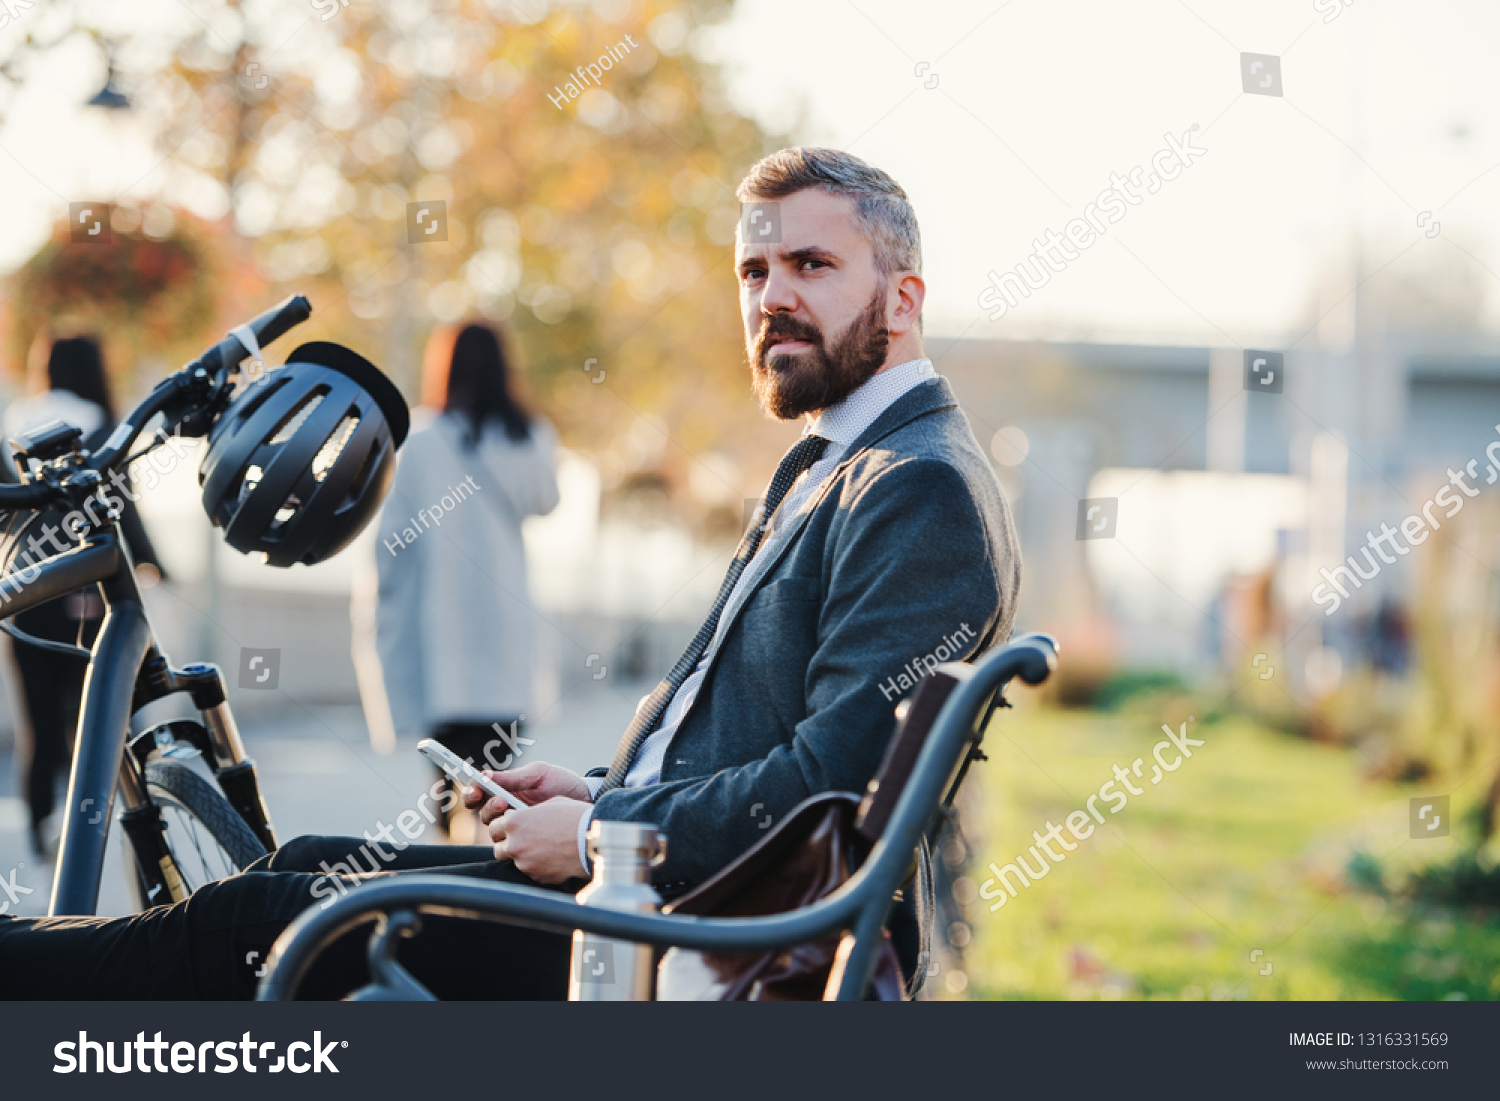 Businessman commuter with bicycle and smartphone sitting on bench in city. #1316331569